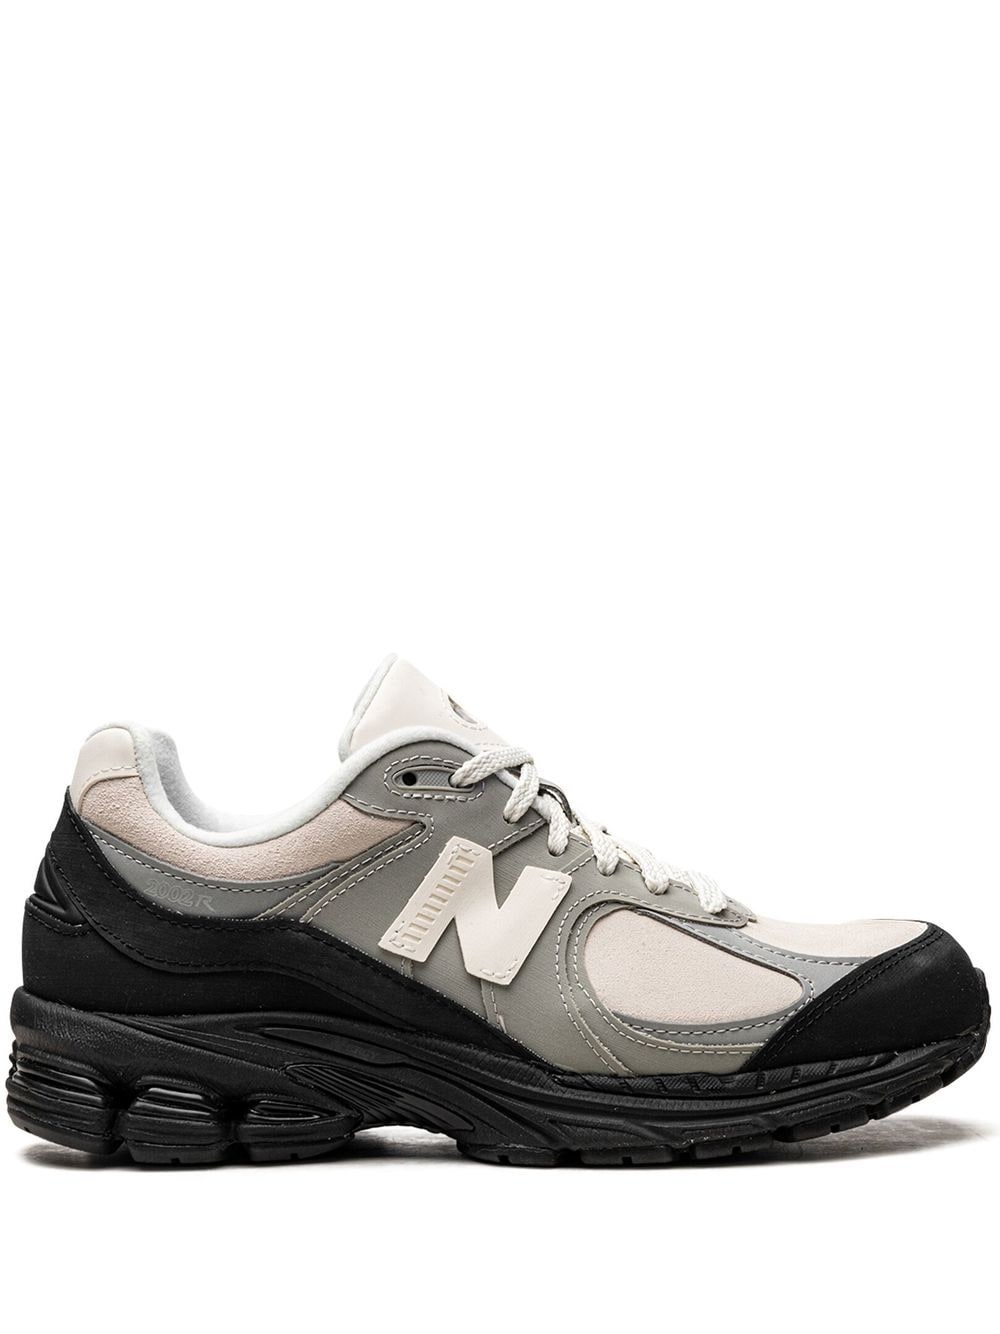 New Balance x The Basement 2002R "Stone Grey" sneakers - Neutrals